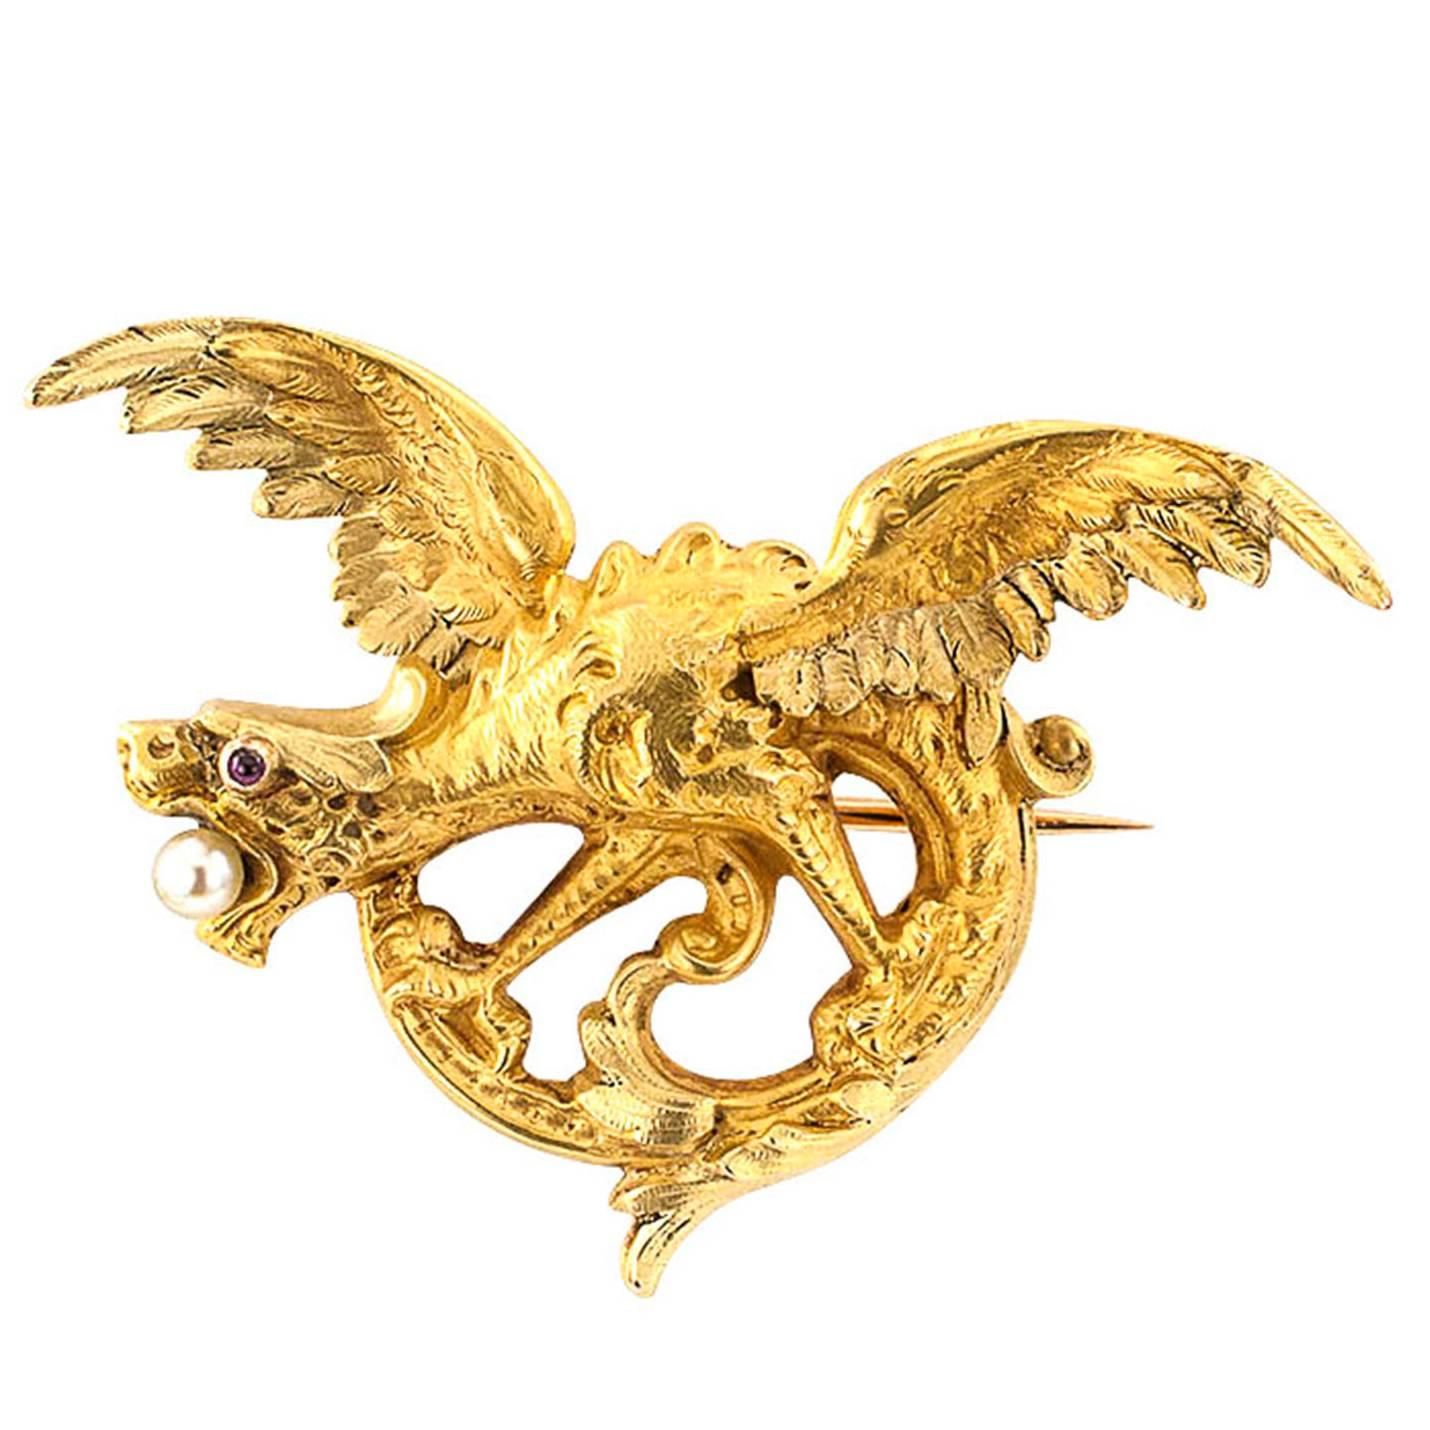 French Antique Gold Dragon Brooch